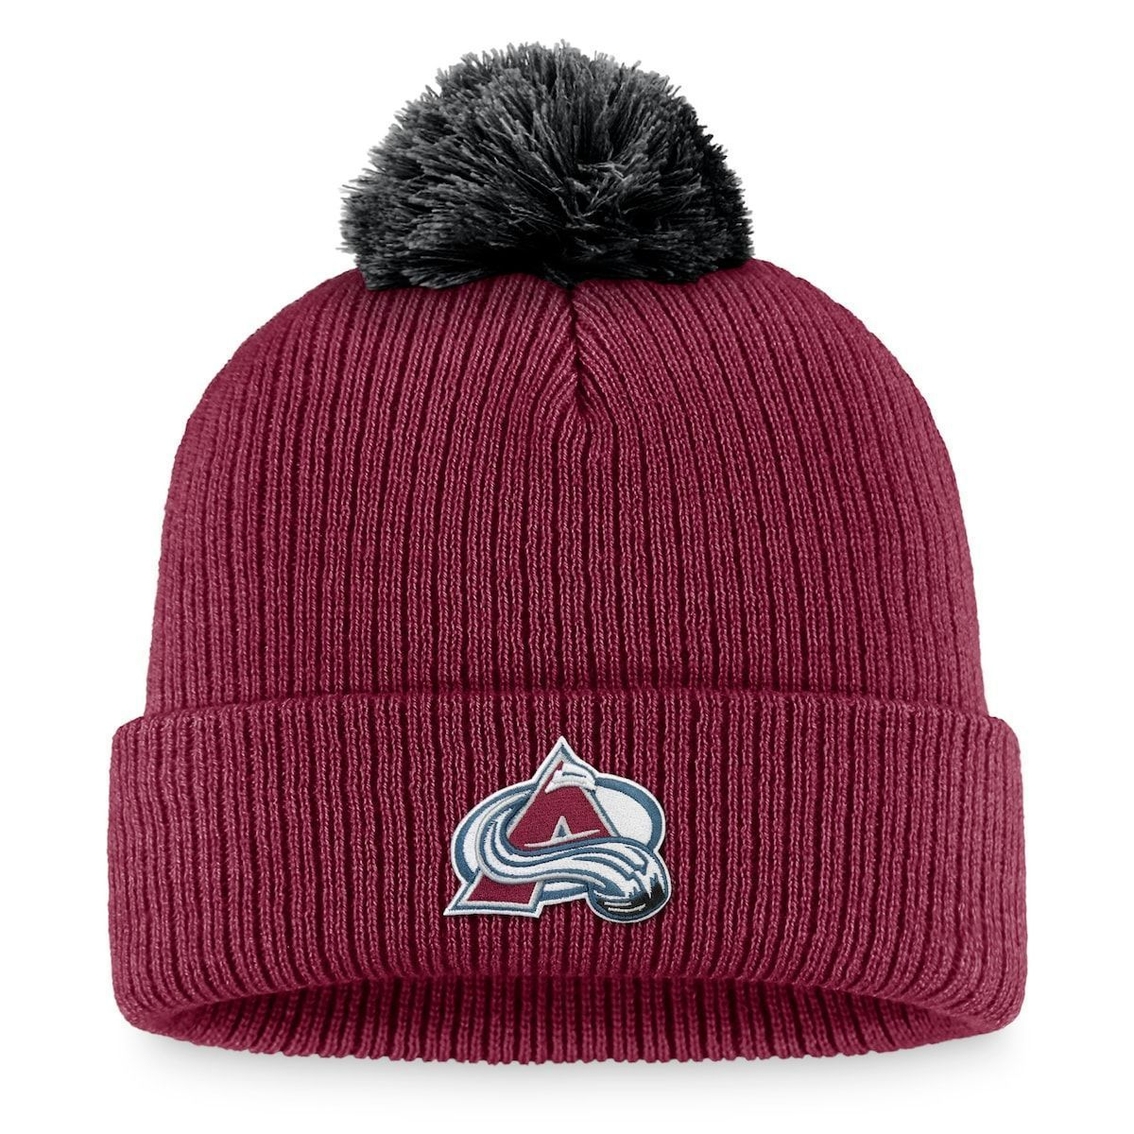 Fanatics Branded Men's Burgundy Colorado Avalanche Team Cuffed Knit Hat with Pom - Image 2 of 3